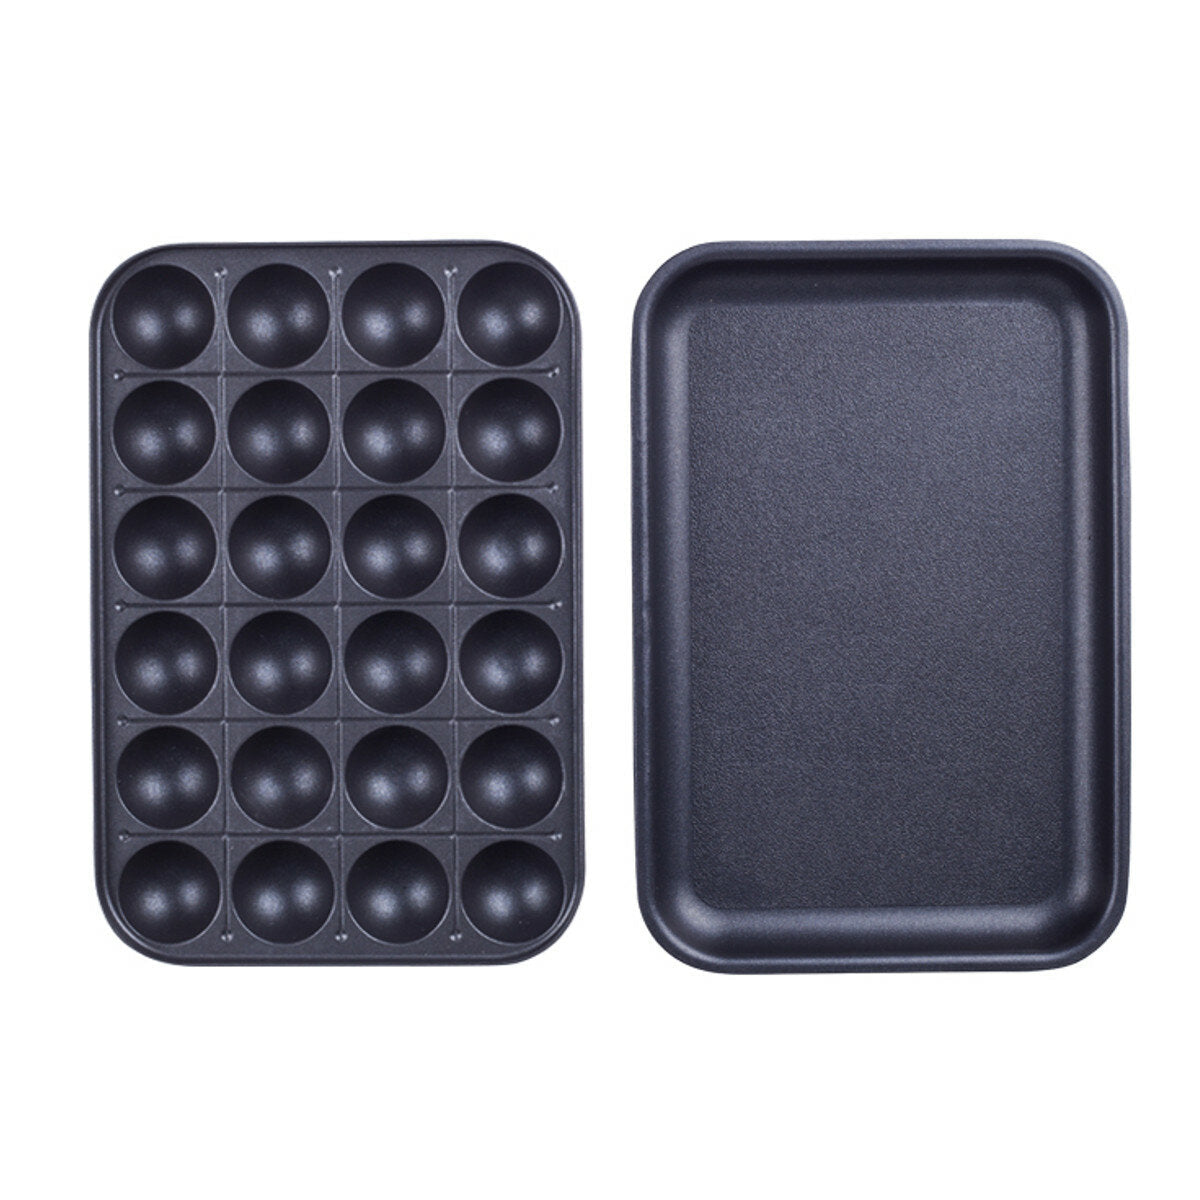 24 Holes Grill Pan Plate Cooking Octopus Ball Kitchen Maker Baking Mold